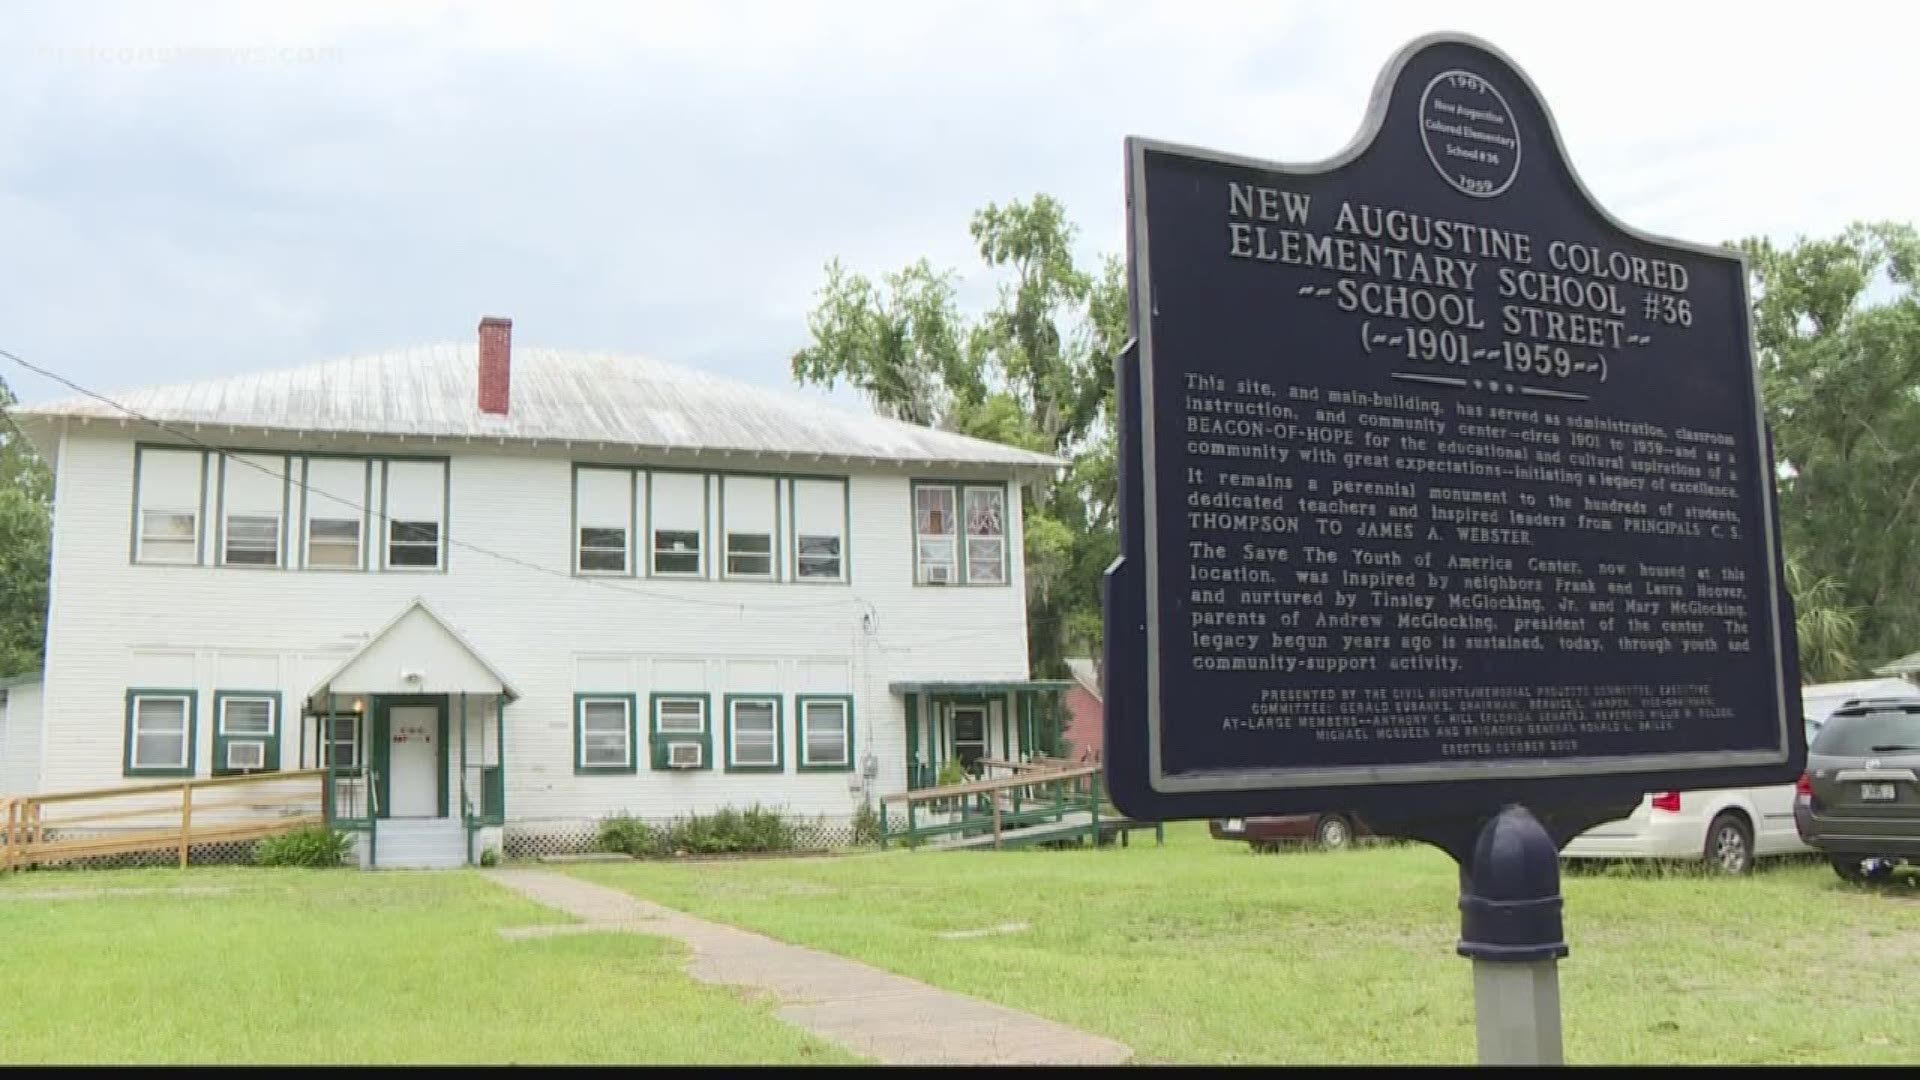 The site was a school for African Americans in St. Augustine in the early 1900s and now a group is trying to save it.